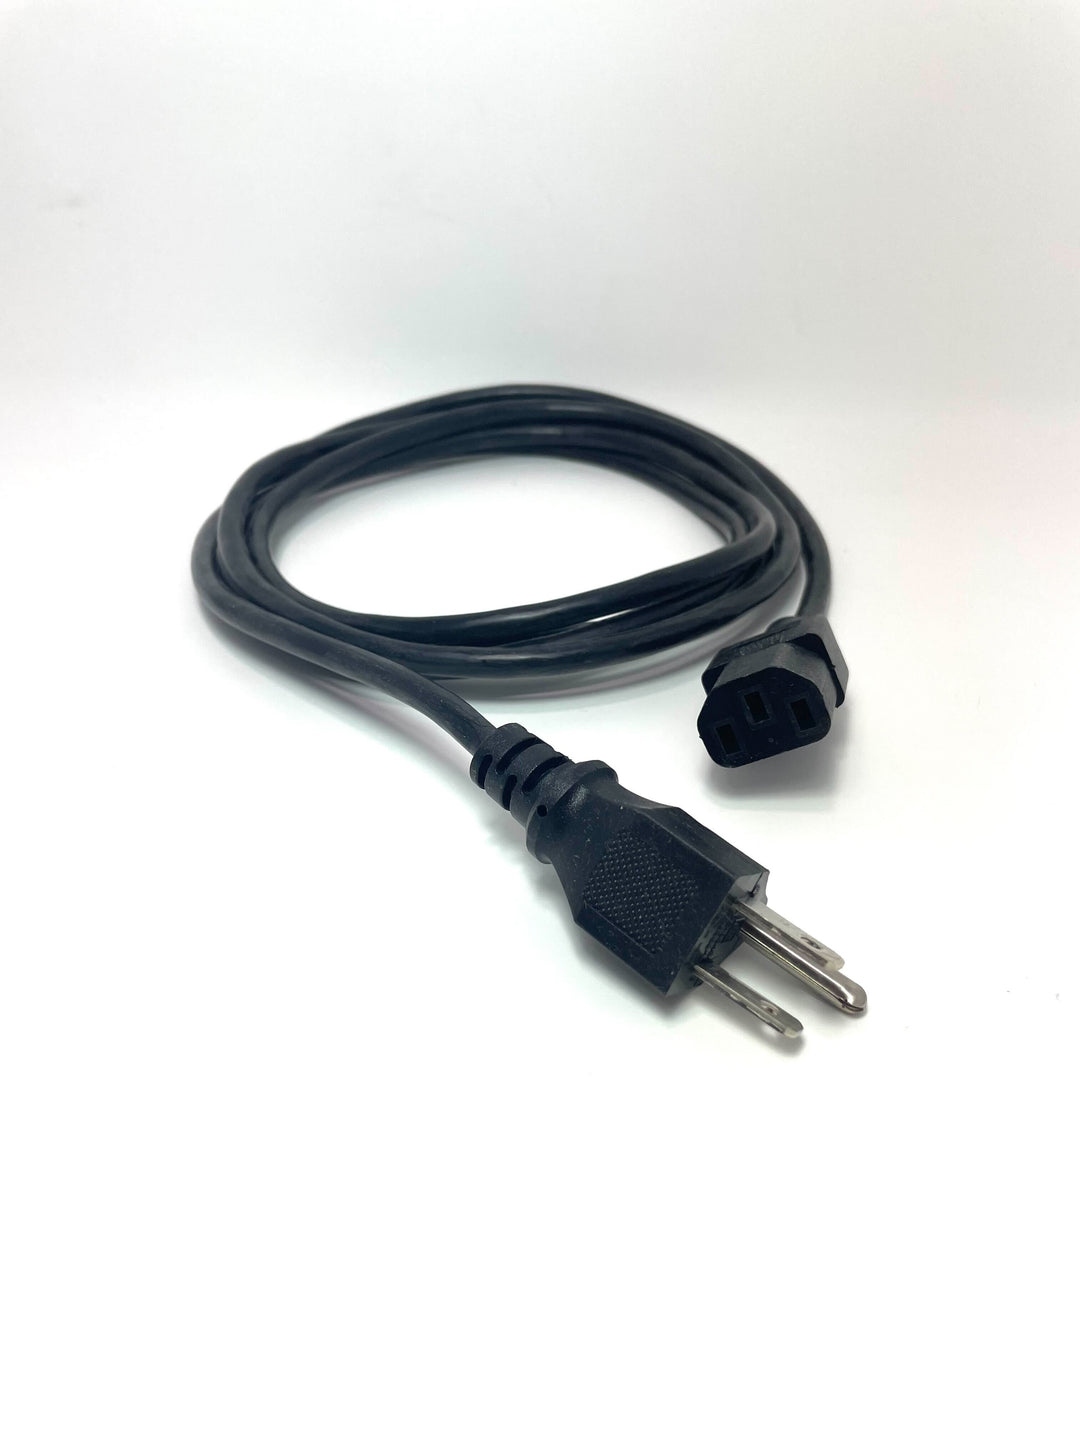 120V Power Cable for A&D Moisture Analyzers